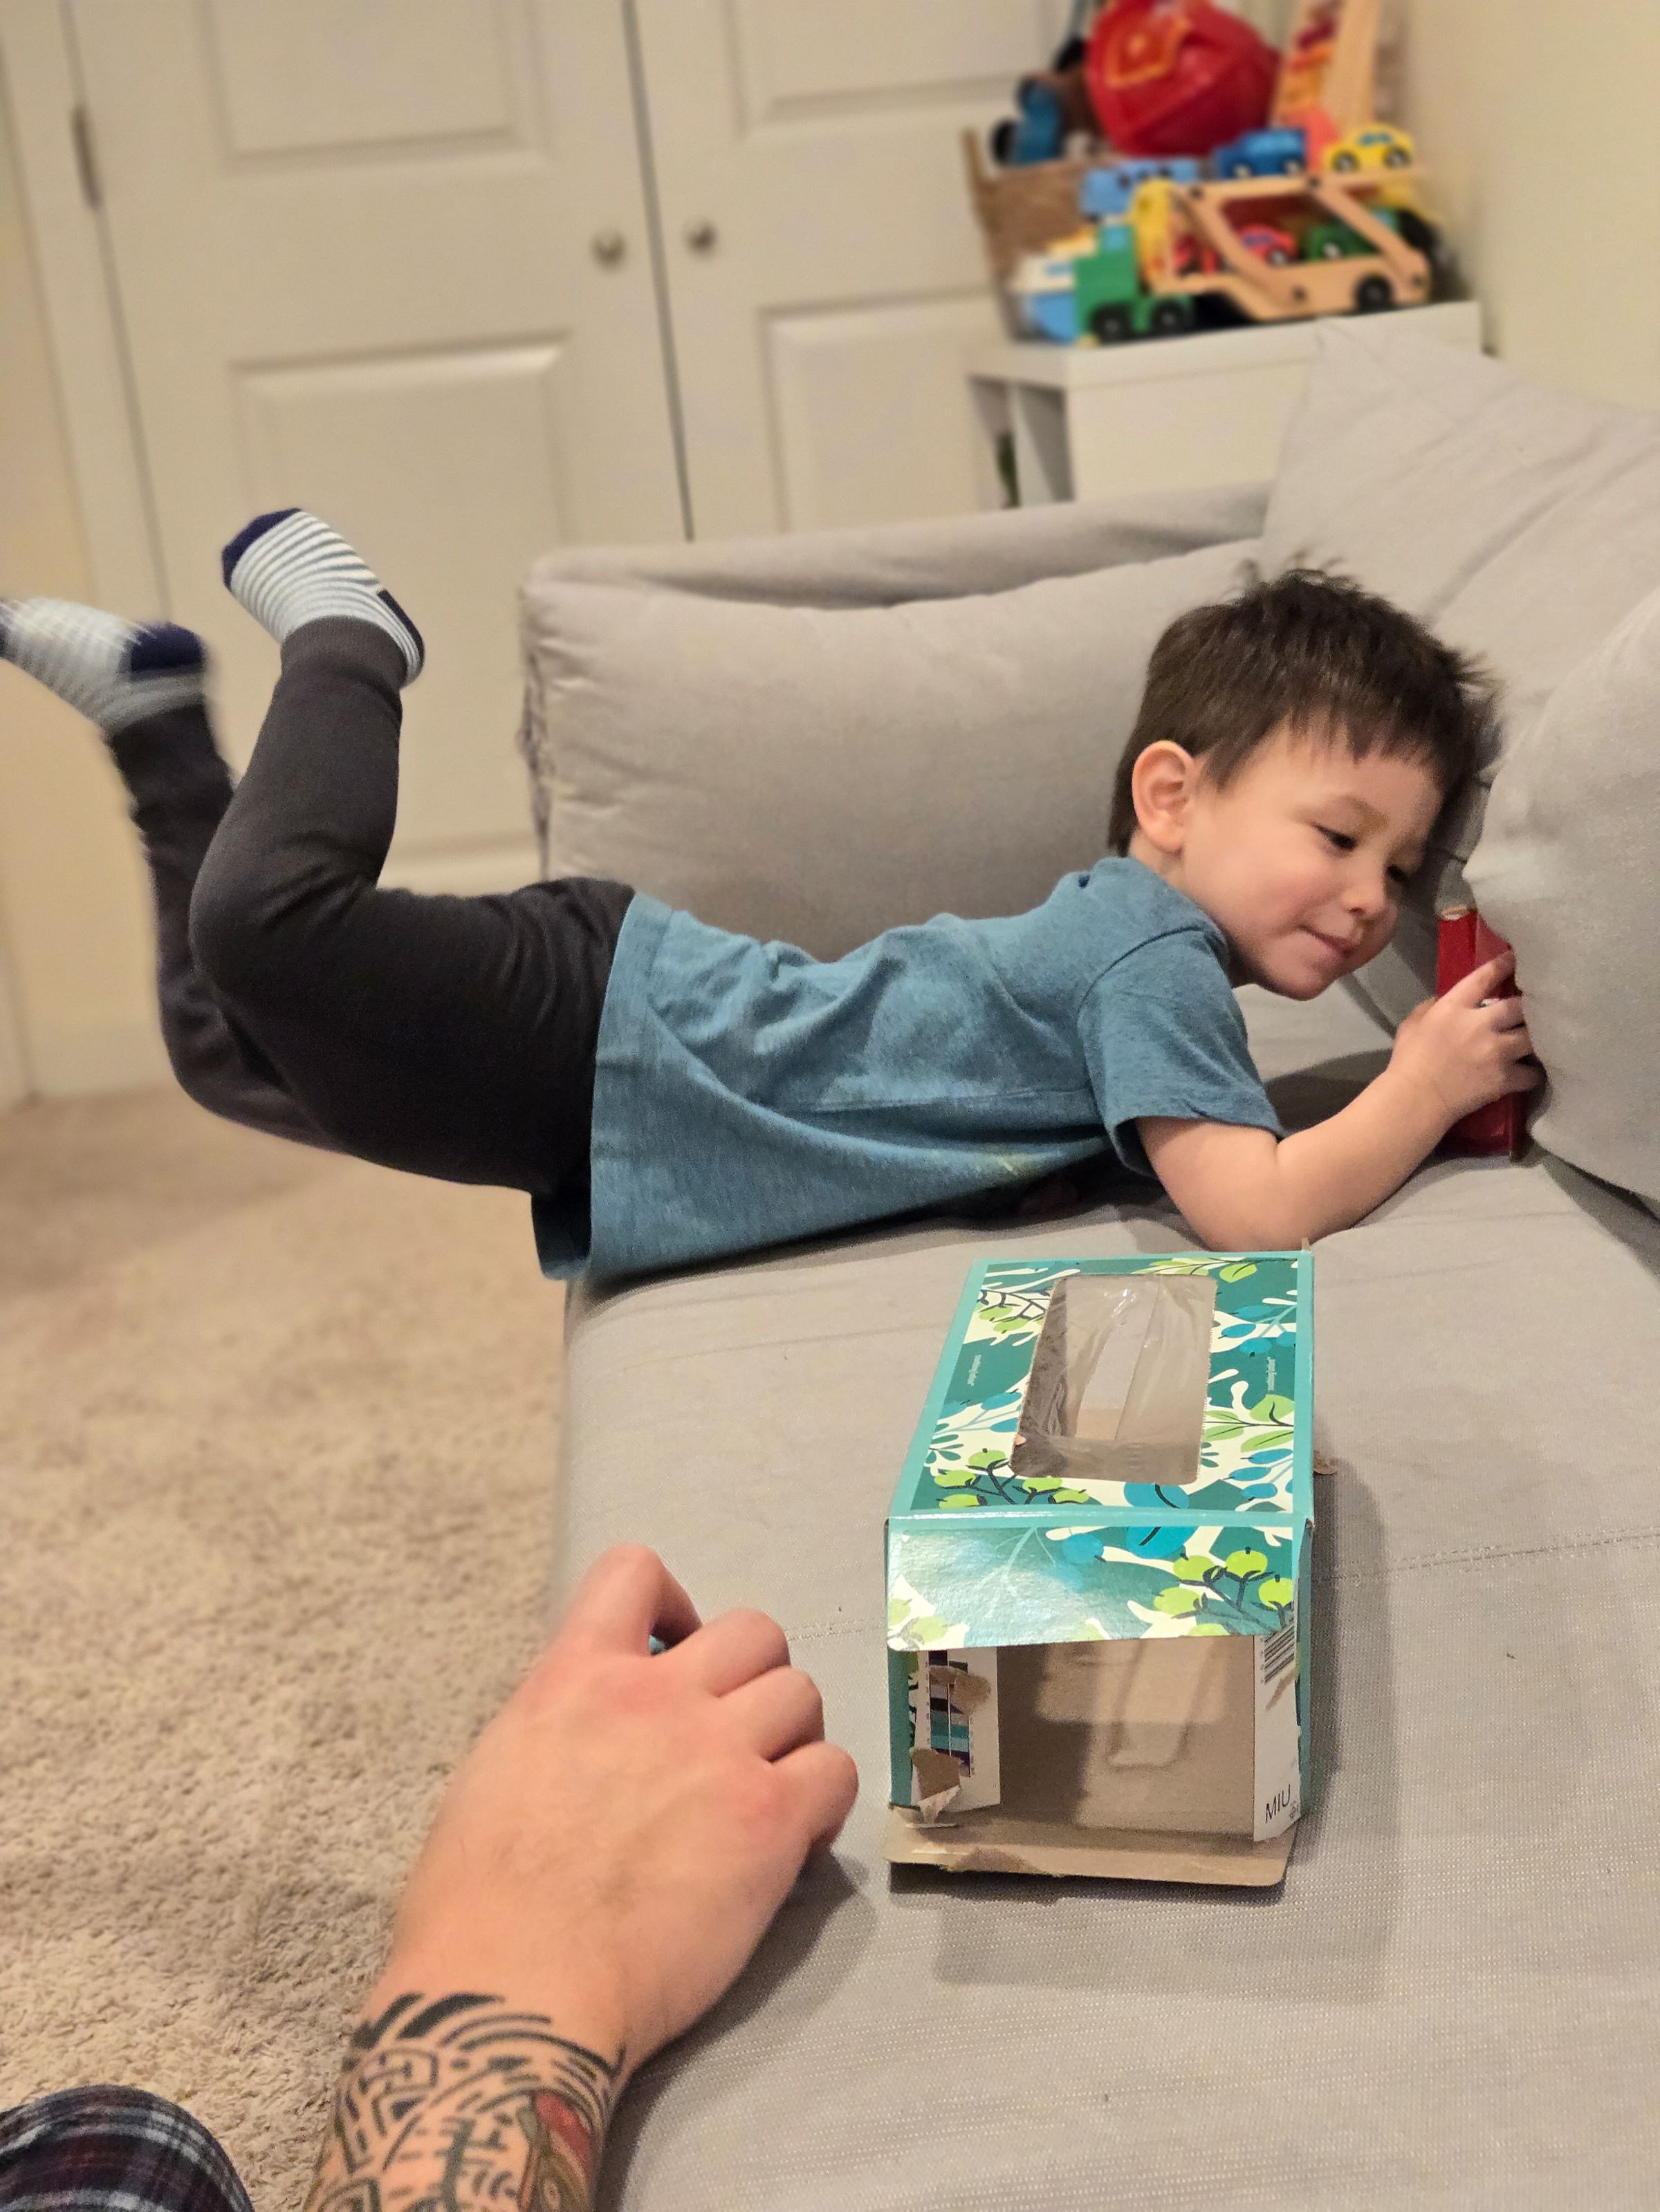 Photo of a child on a couch with blurred arm in the foreground.